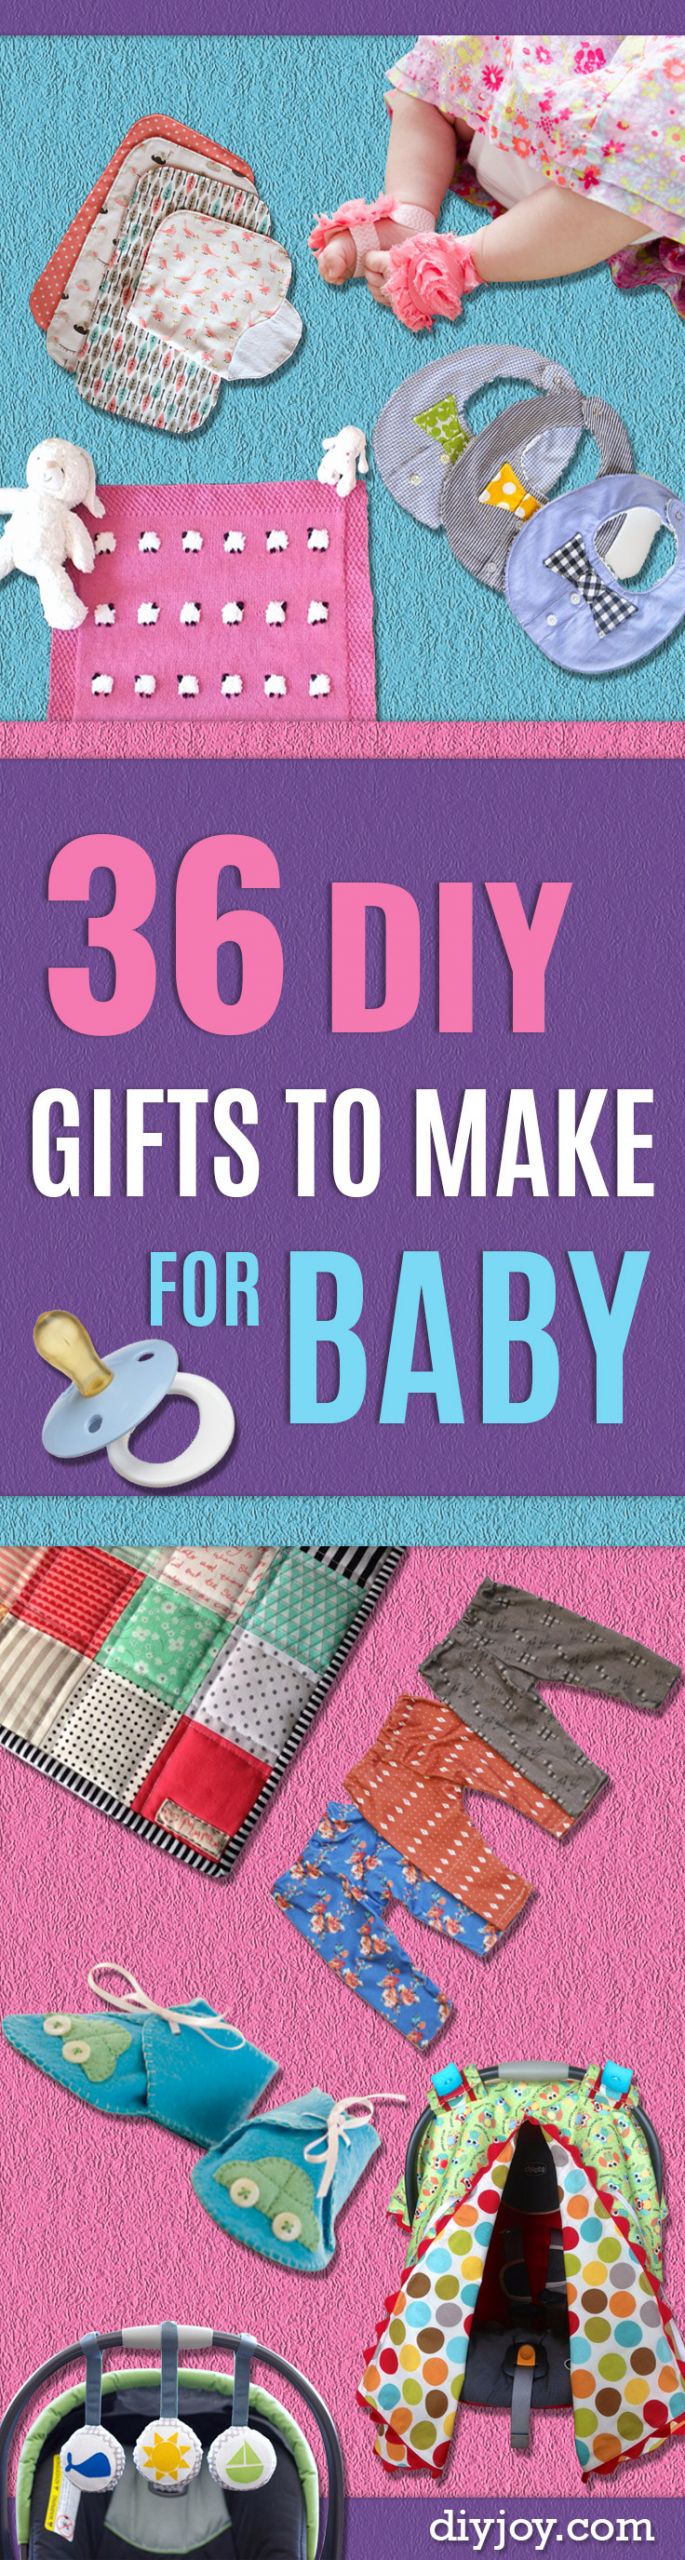 Baby Gifts Diy
 36 Best DIY Gifts To Make For Baby